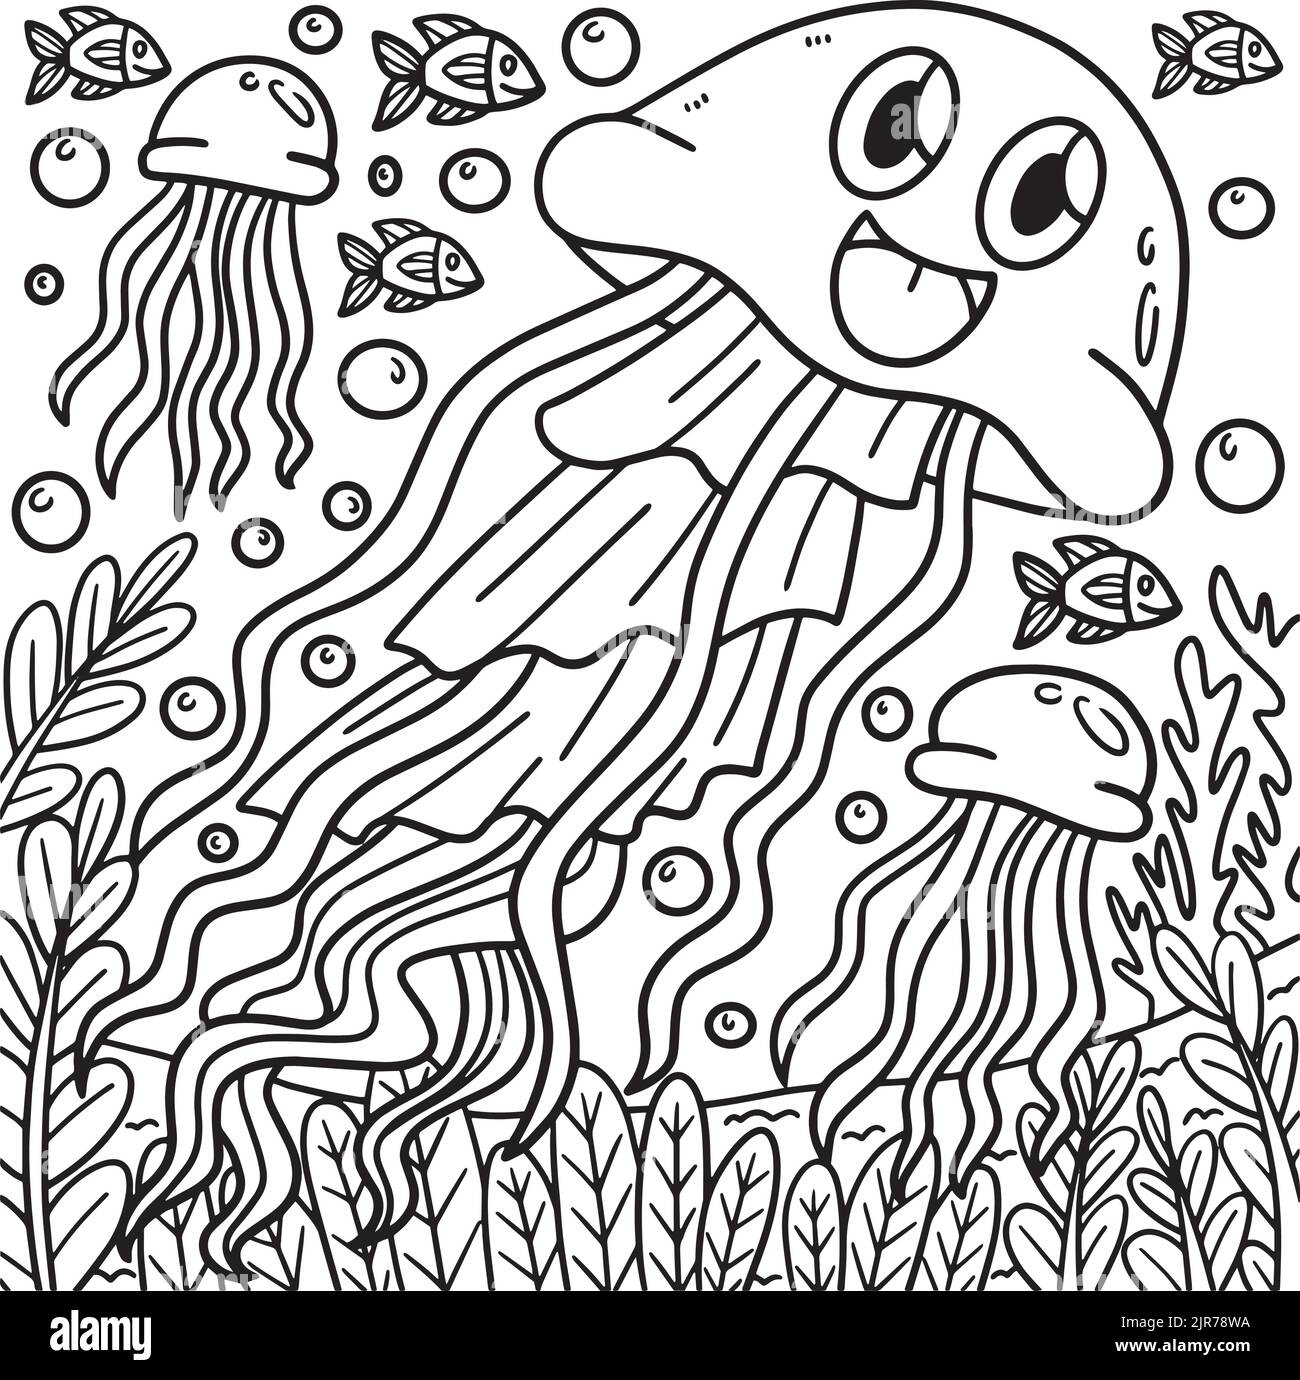 Jellyfish Coloring Page for Kids Stock Vector